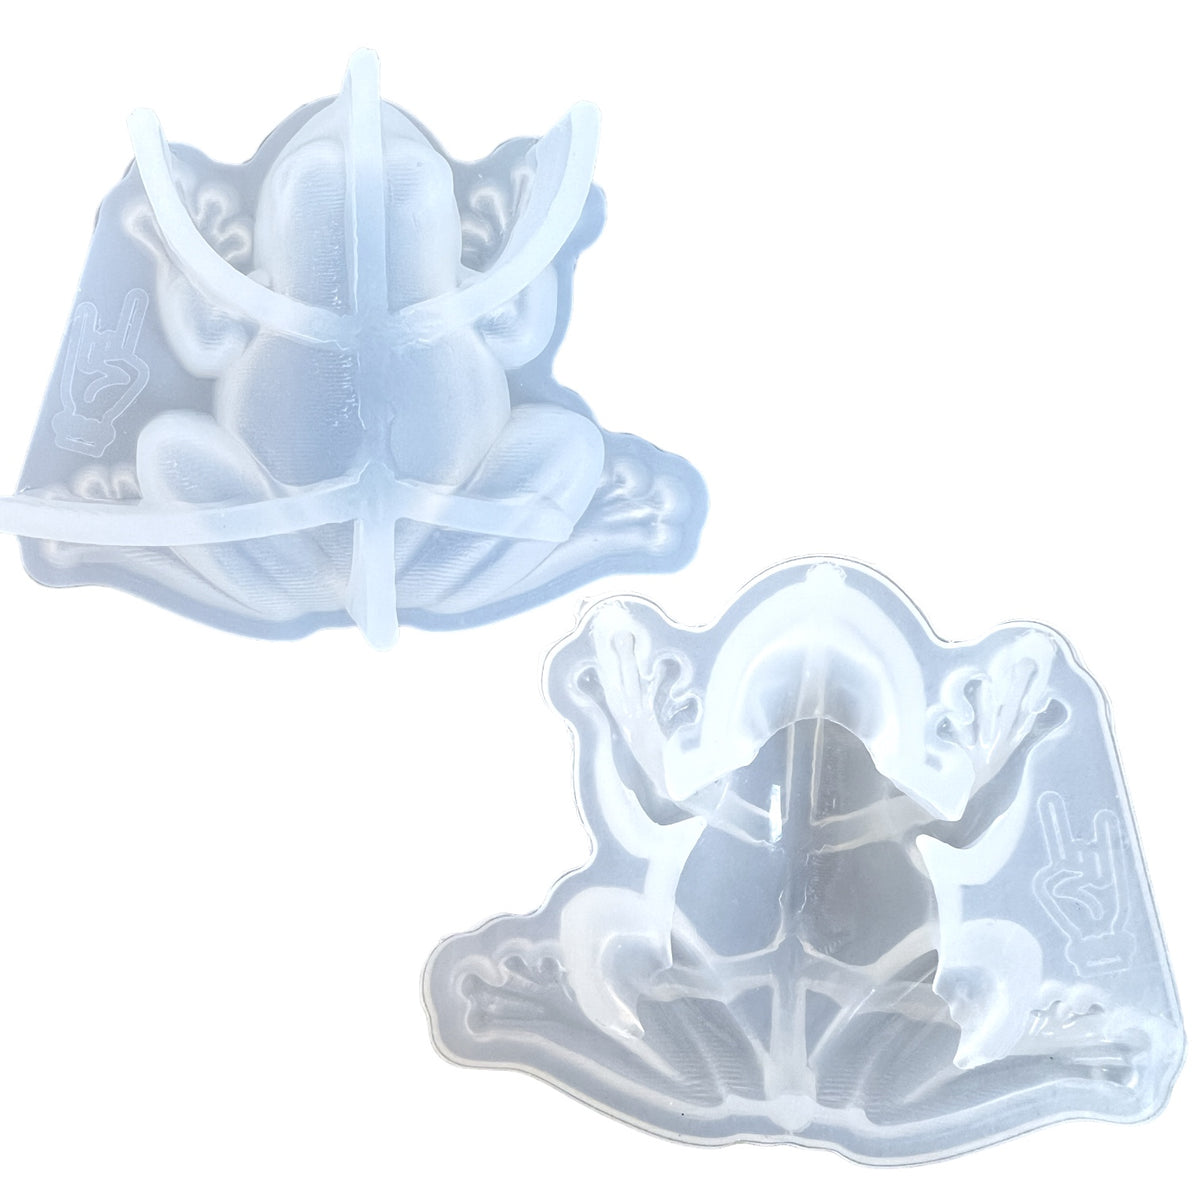 Resin Rockers Exclusive 3D Mini Puddles the Frog Mold for UV and Epoxy Resin Art